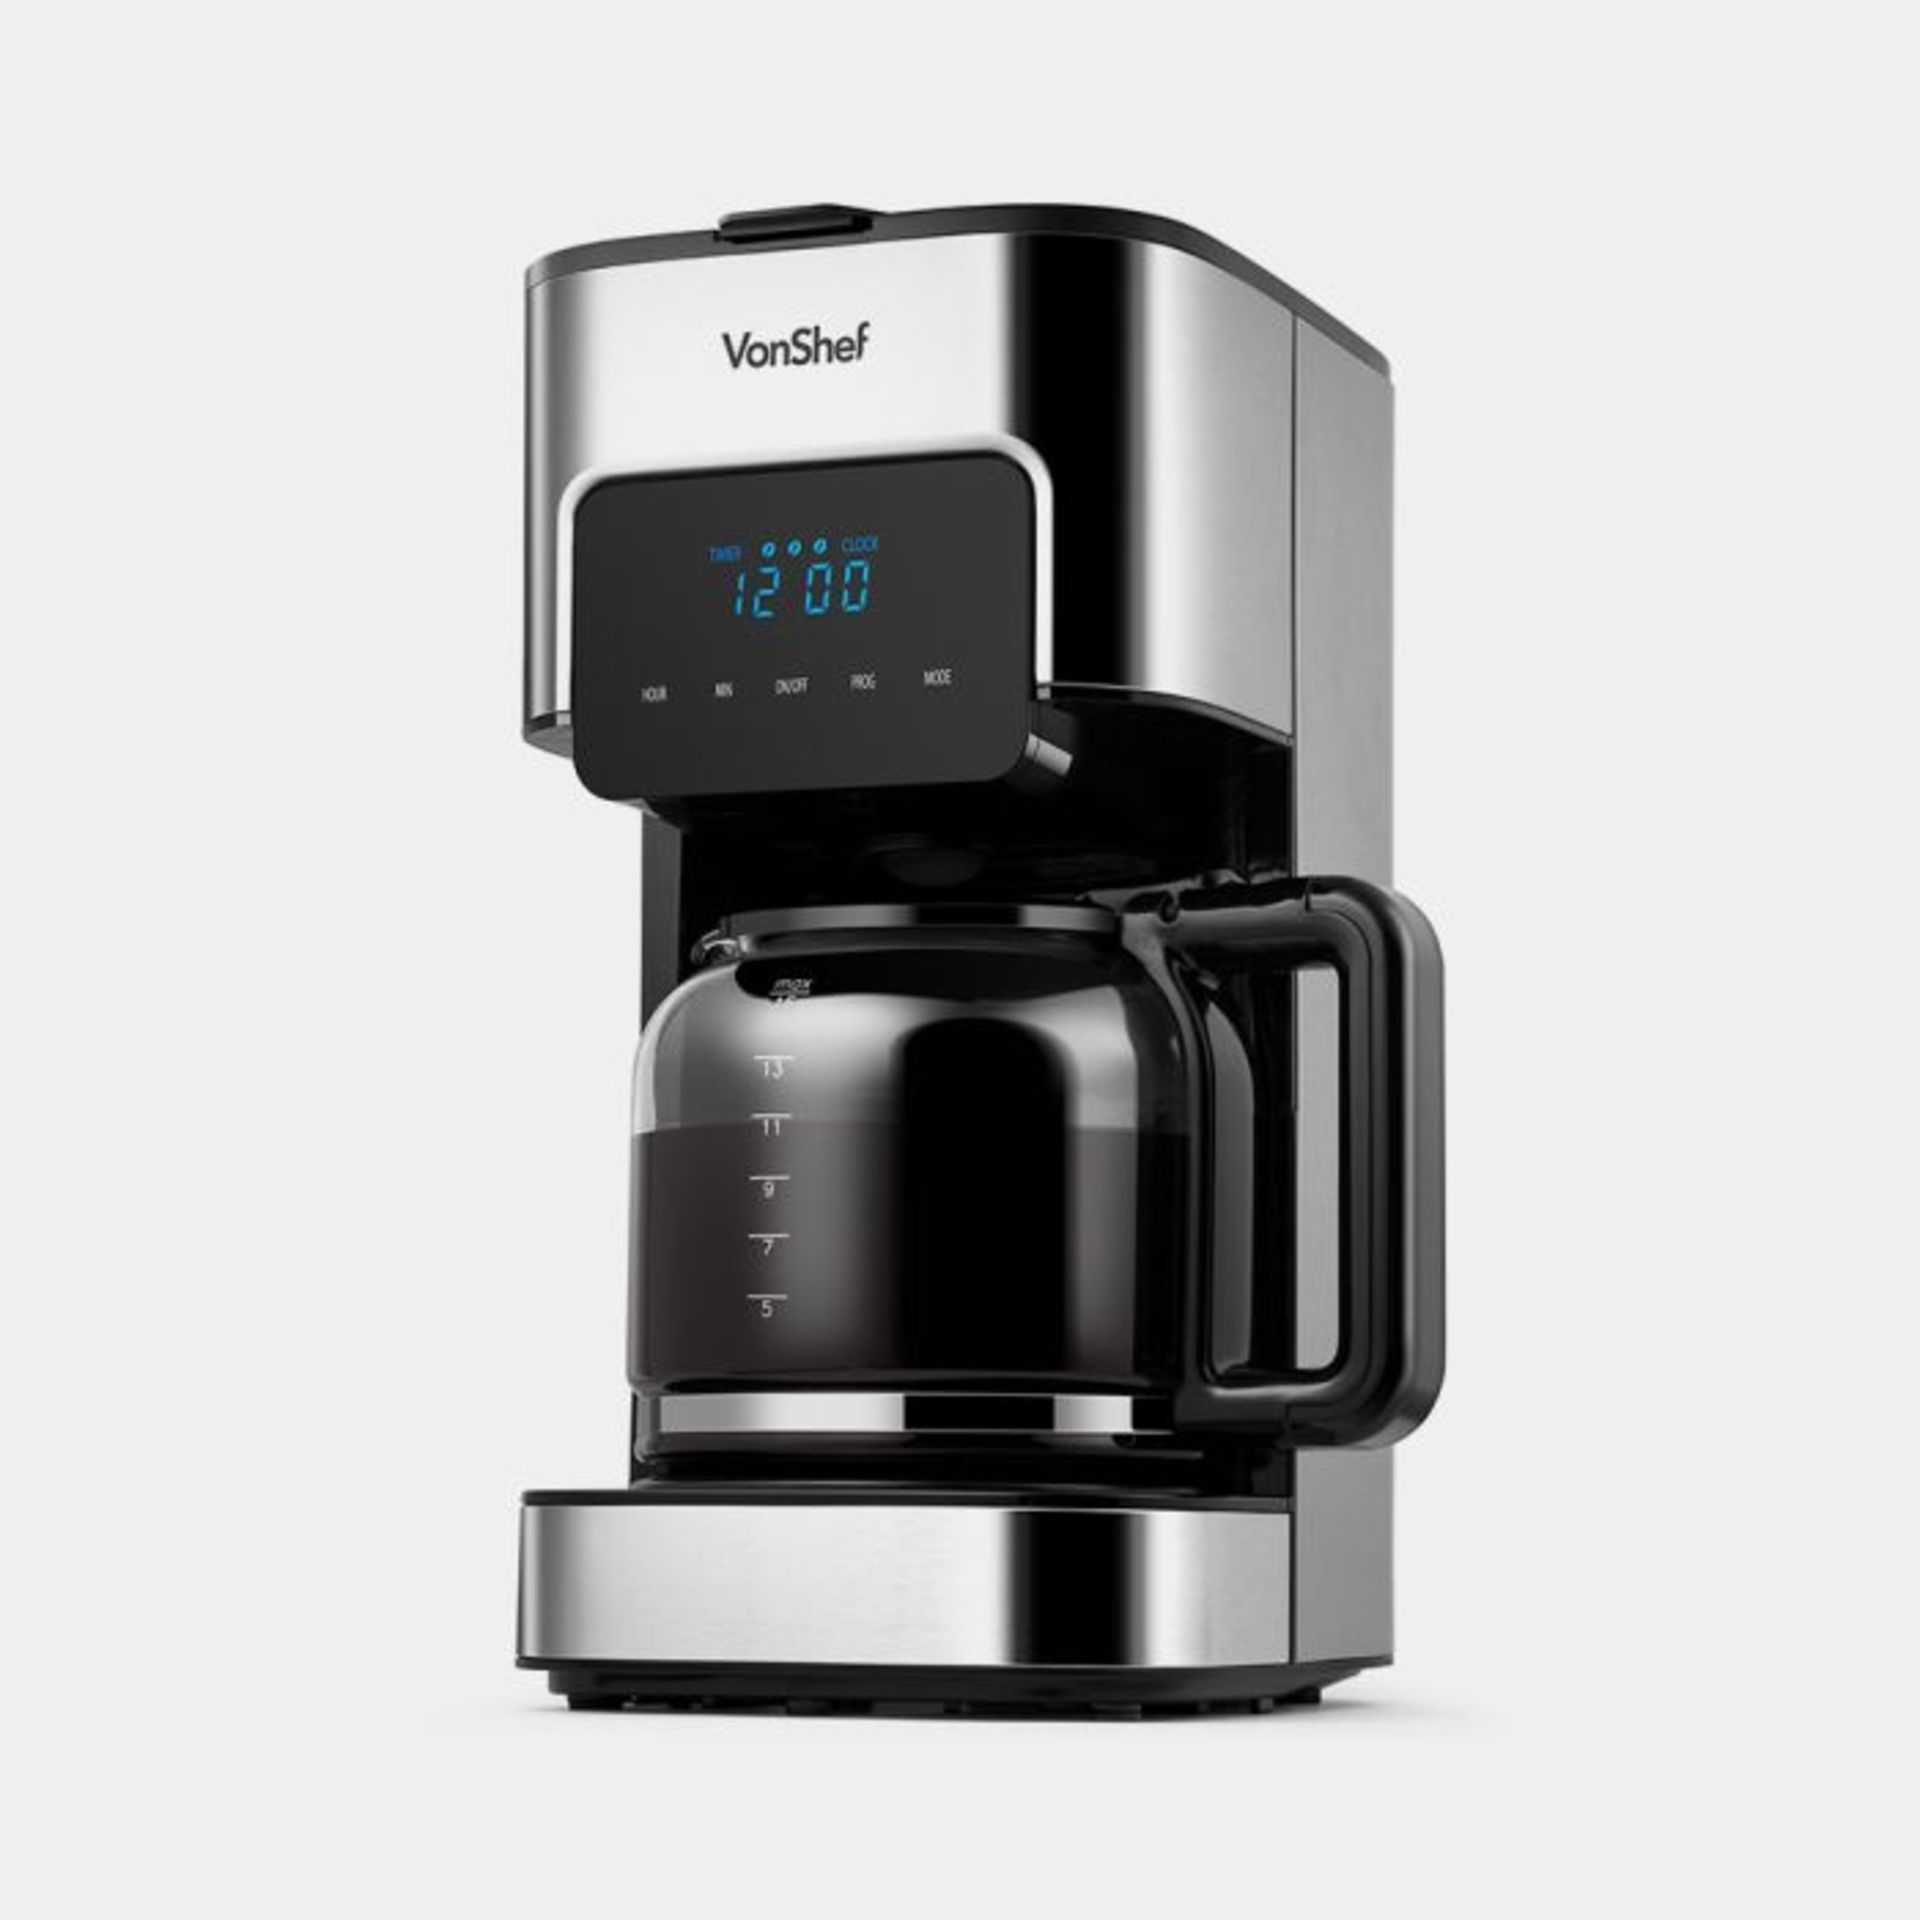 1.5L Filter Coffee Machine. - ER51. Make yourself a tasty coffee to start the day off right with